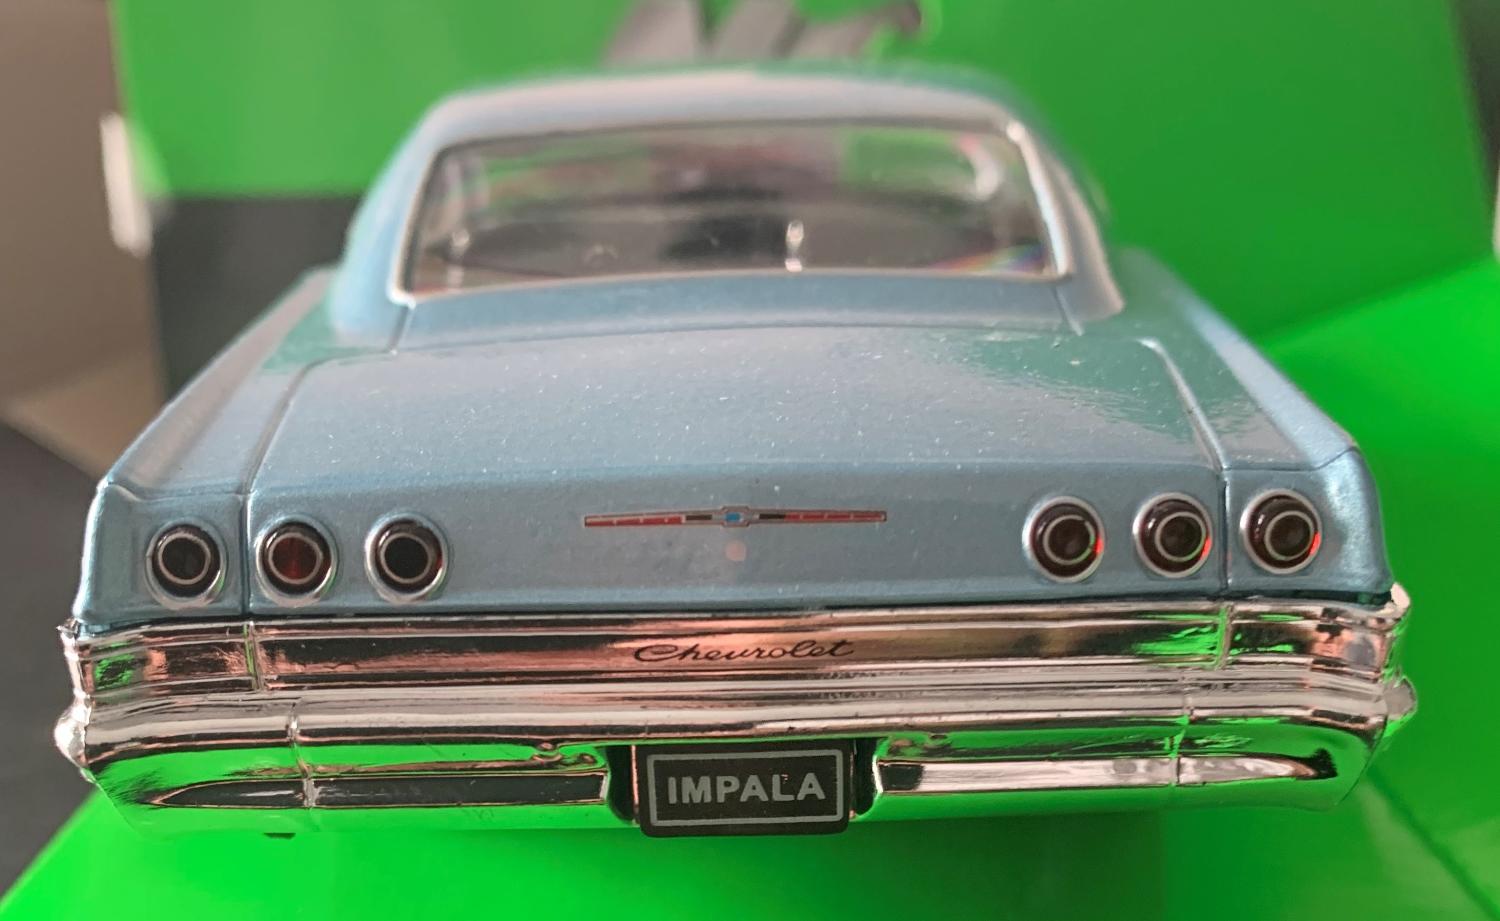 Chevrolet Impala SS 396 1965 in light blue 1:24 scale model from Welly